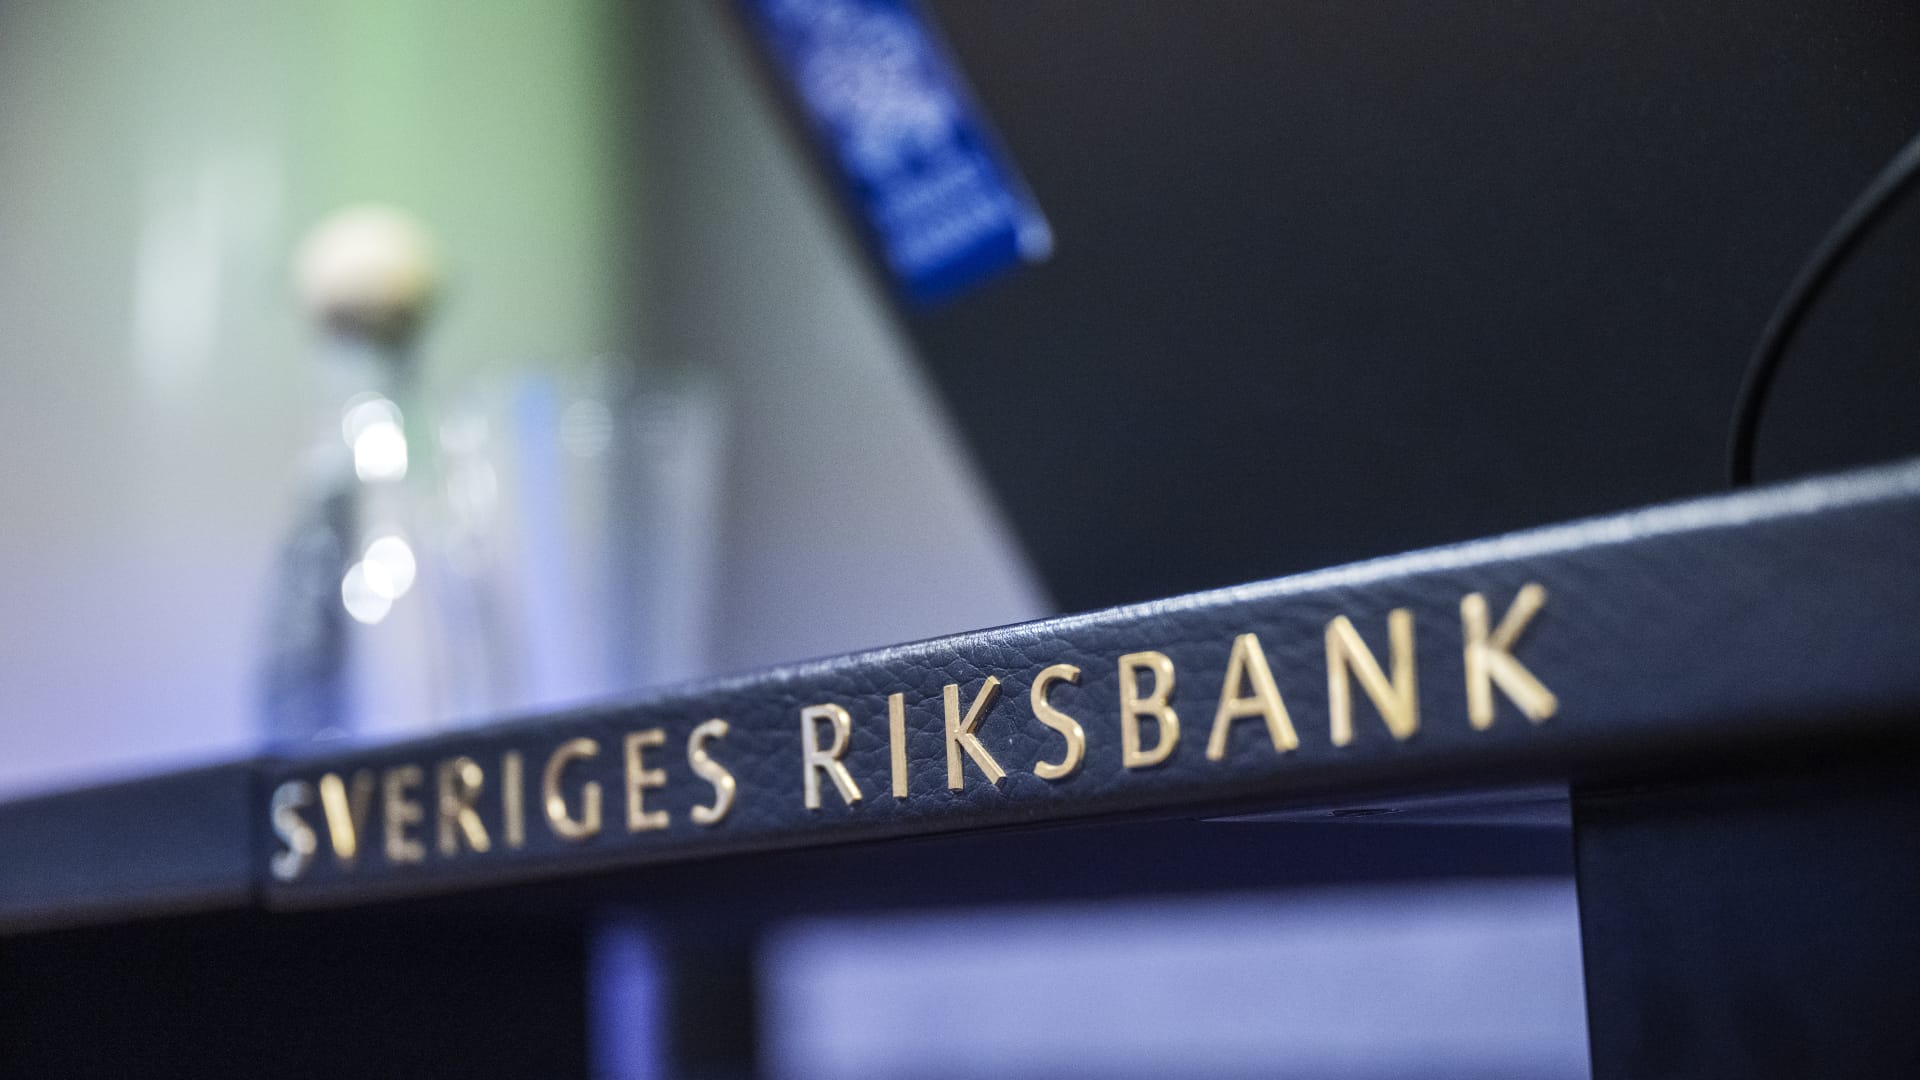 Sweden’s central bank launches 100 basis point rate hike, says ‘inflation is too high’